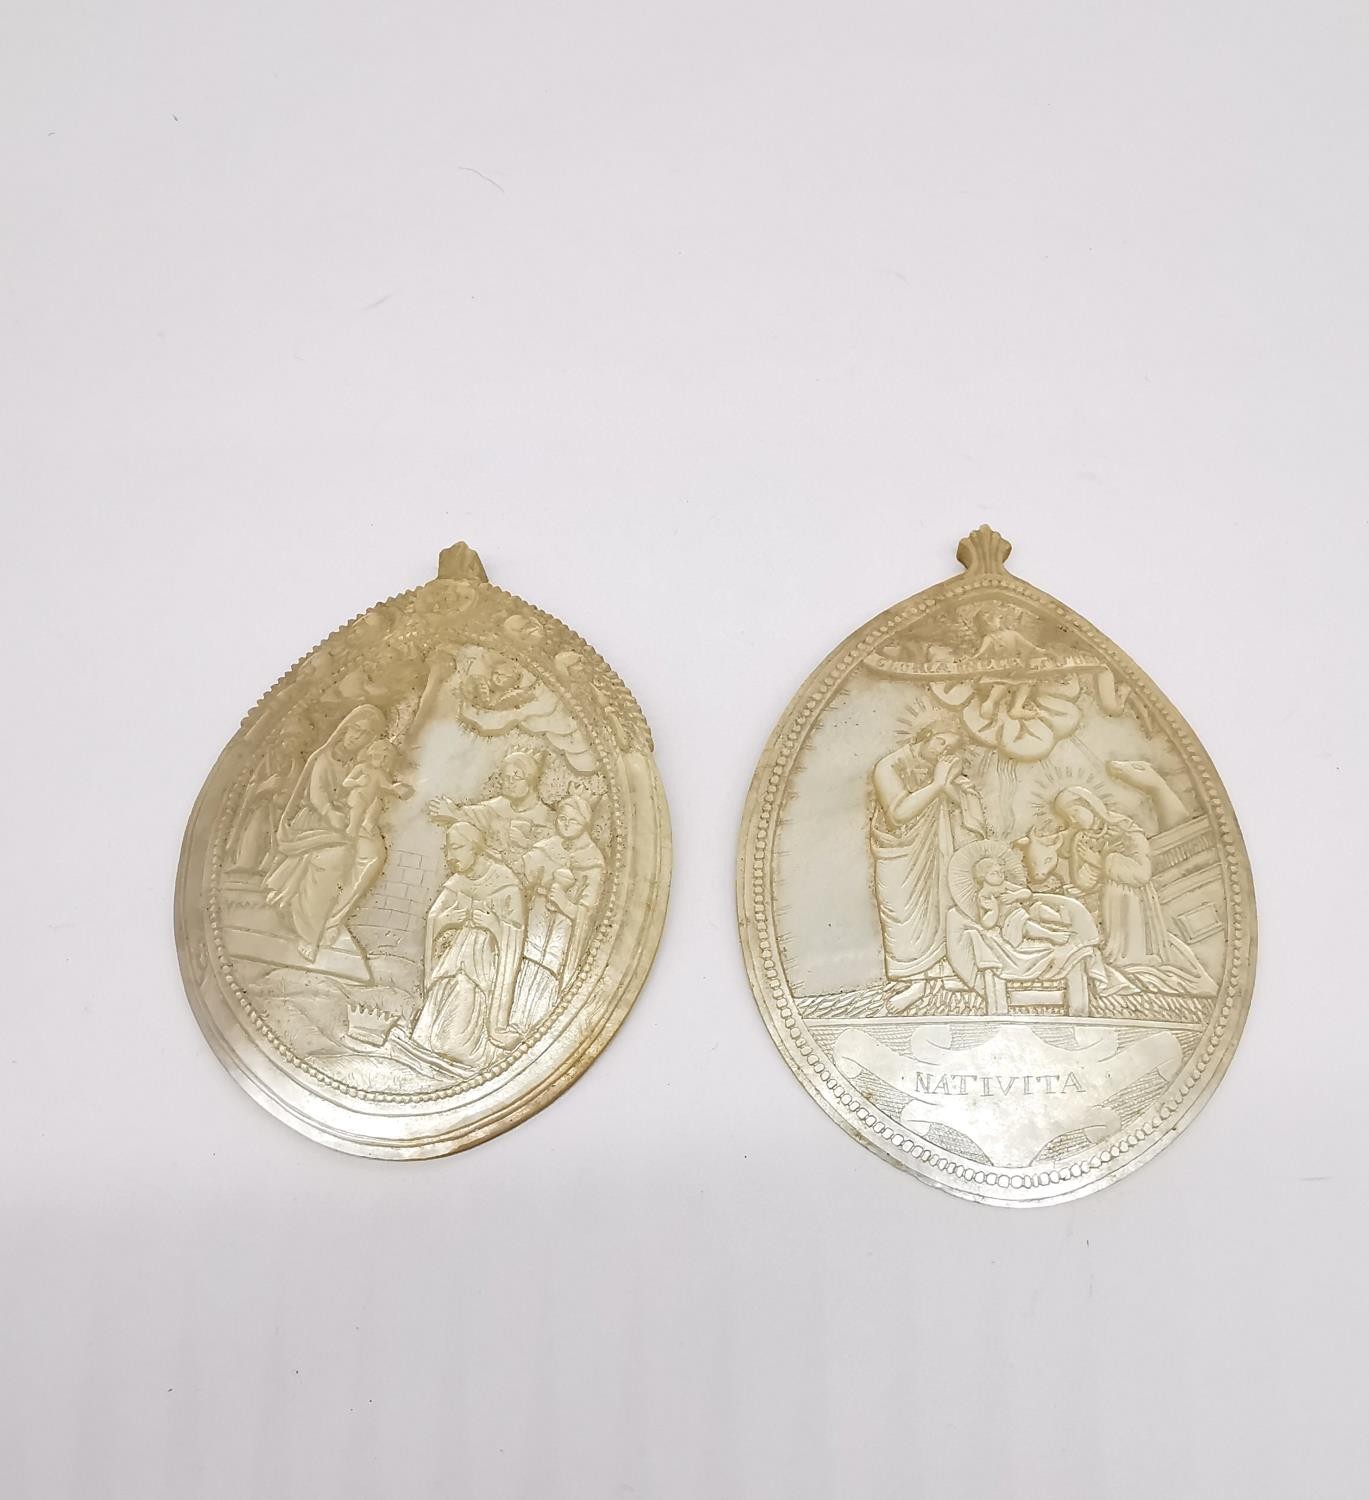 Two 19th century carved mother of pearl religious medallions depicting The Annunciation, Holy Land